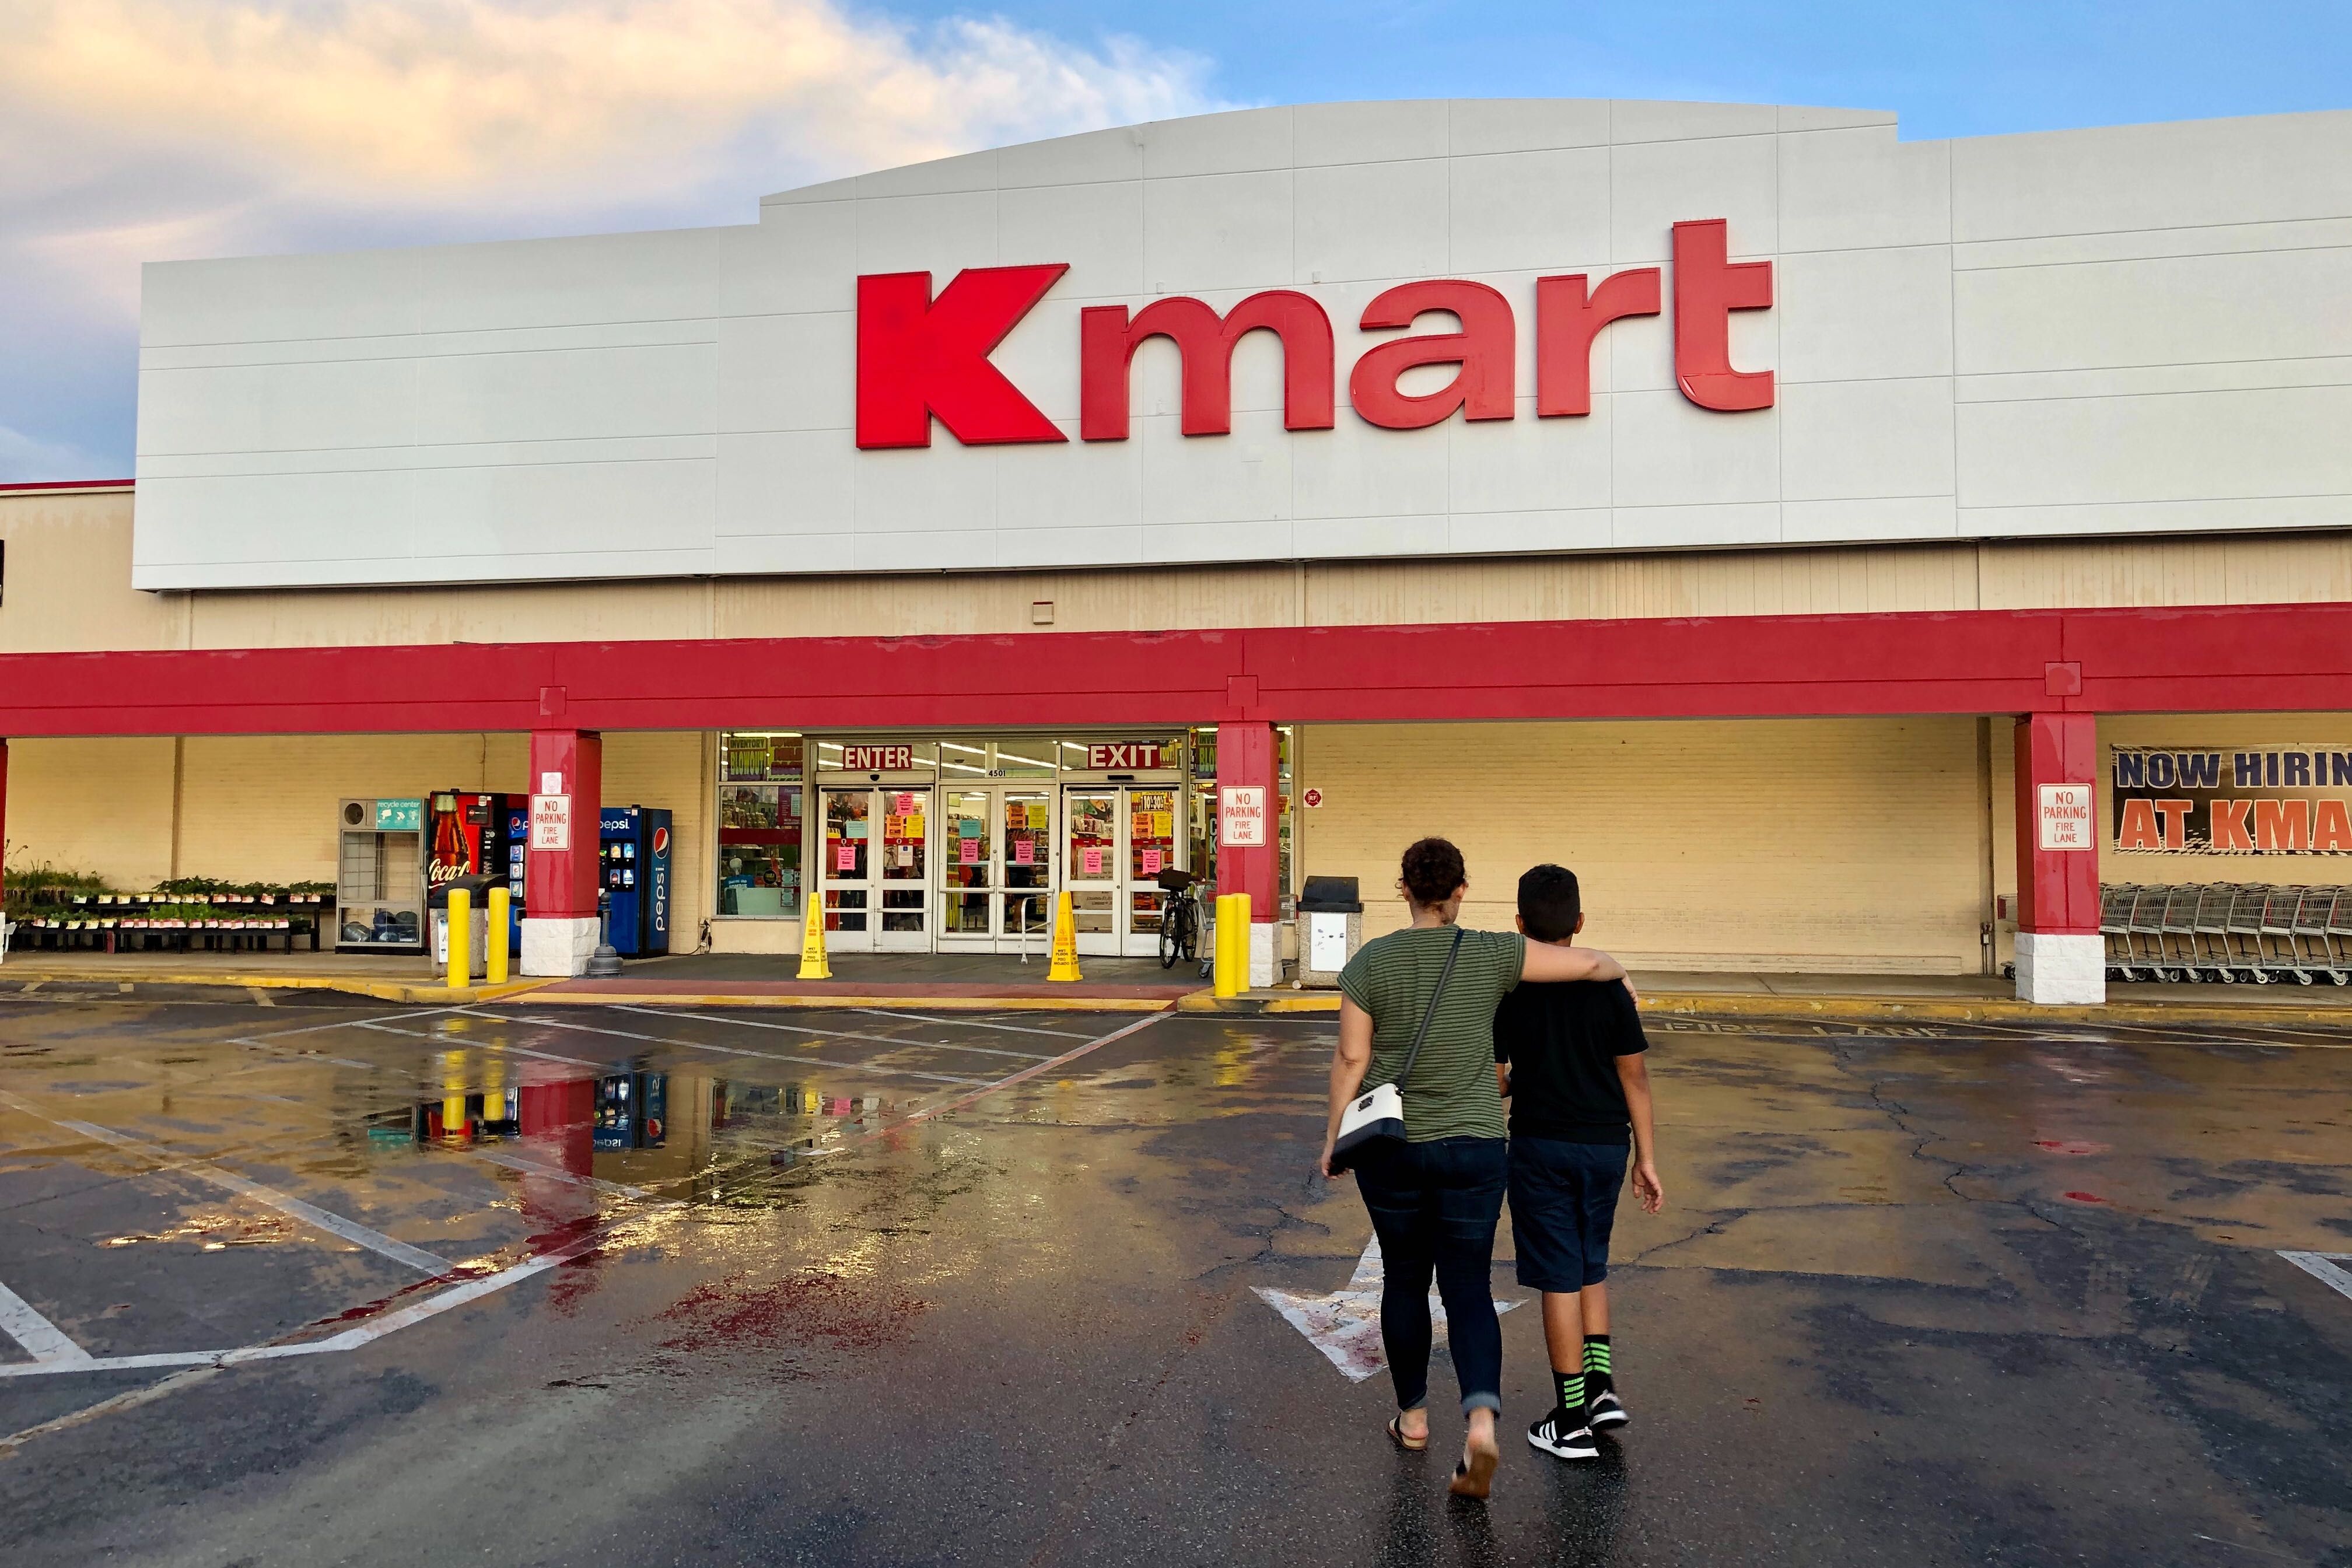 Kmart is closing dozens of stores as parent company Sears weathers